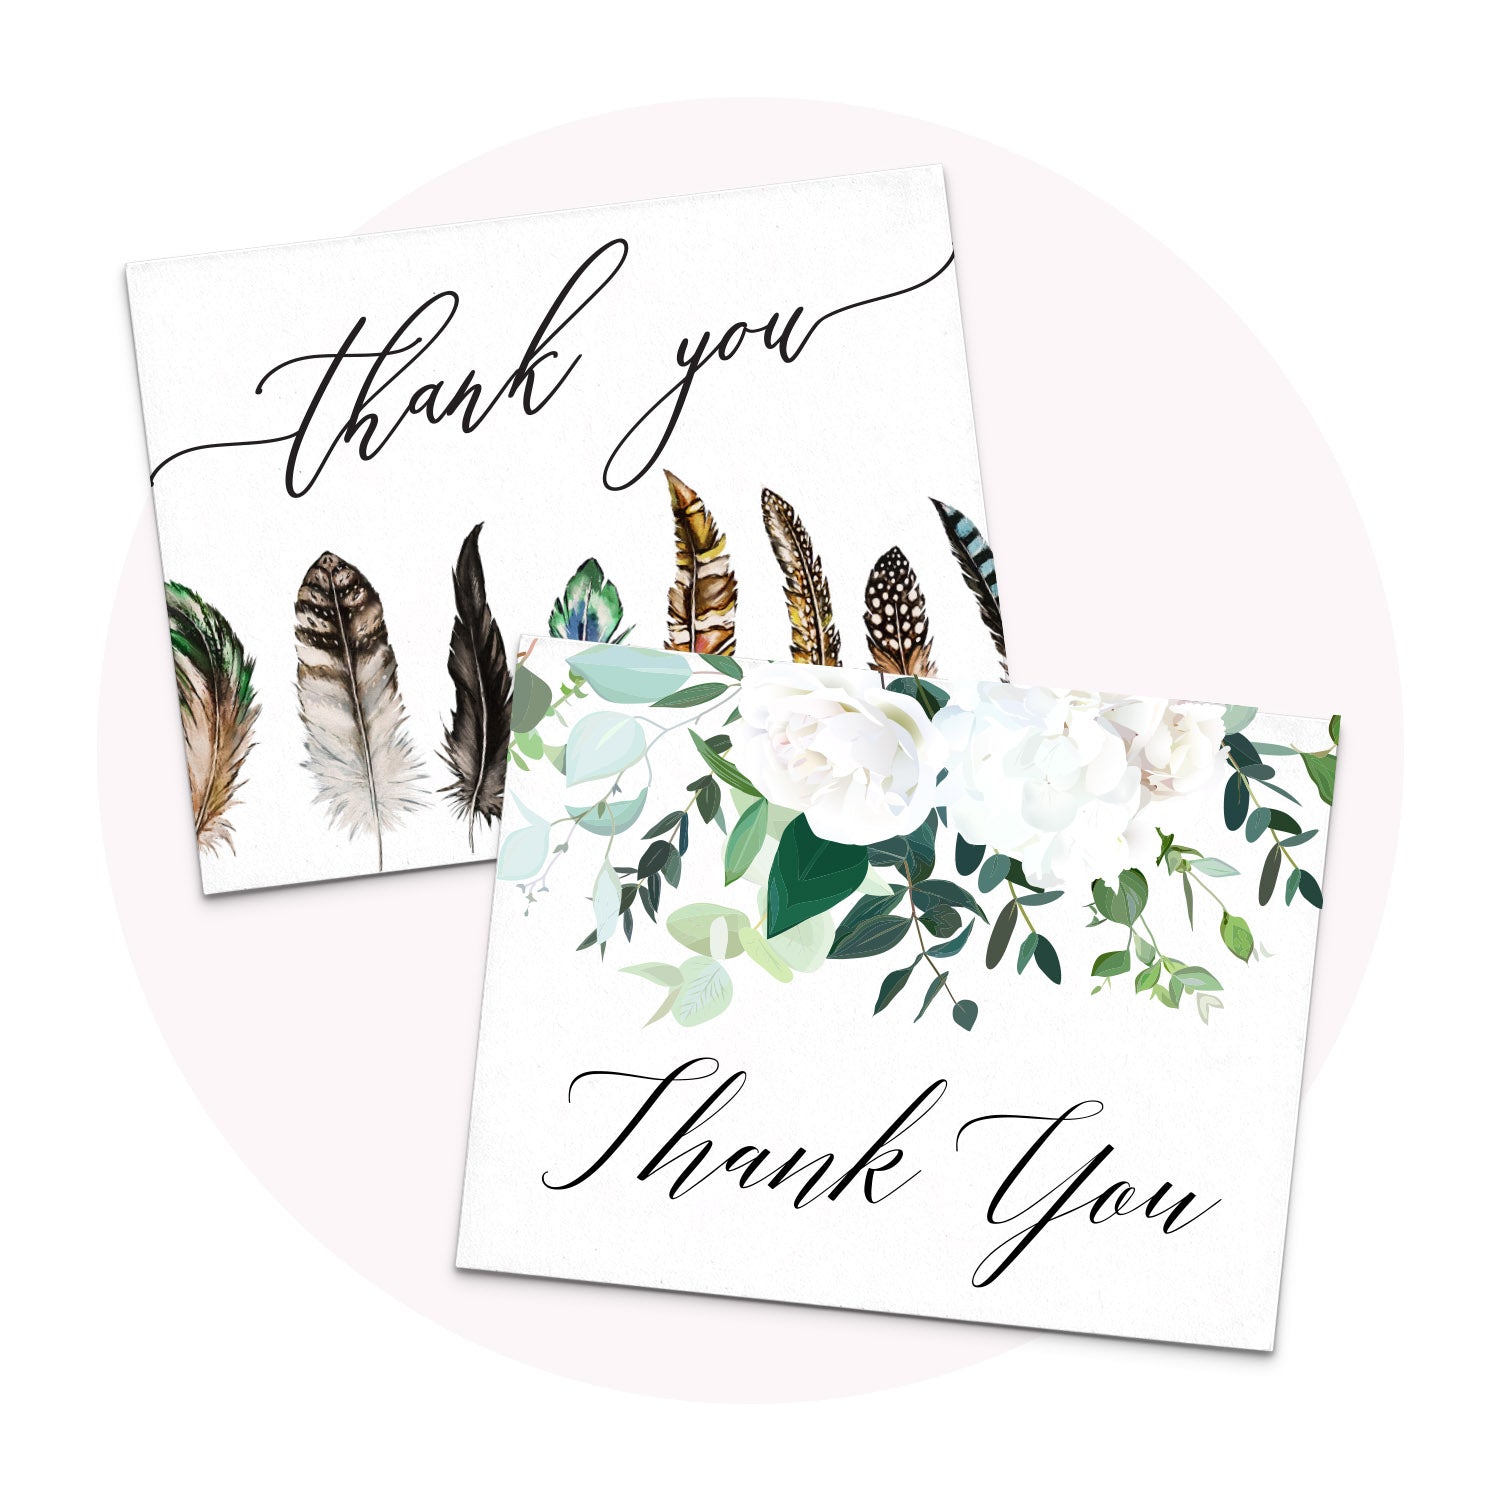 50 Beautiful Thank You Note For Gift Options to Make Your Mark